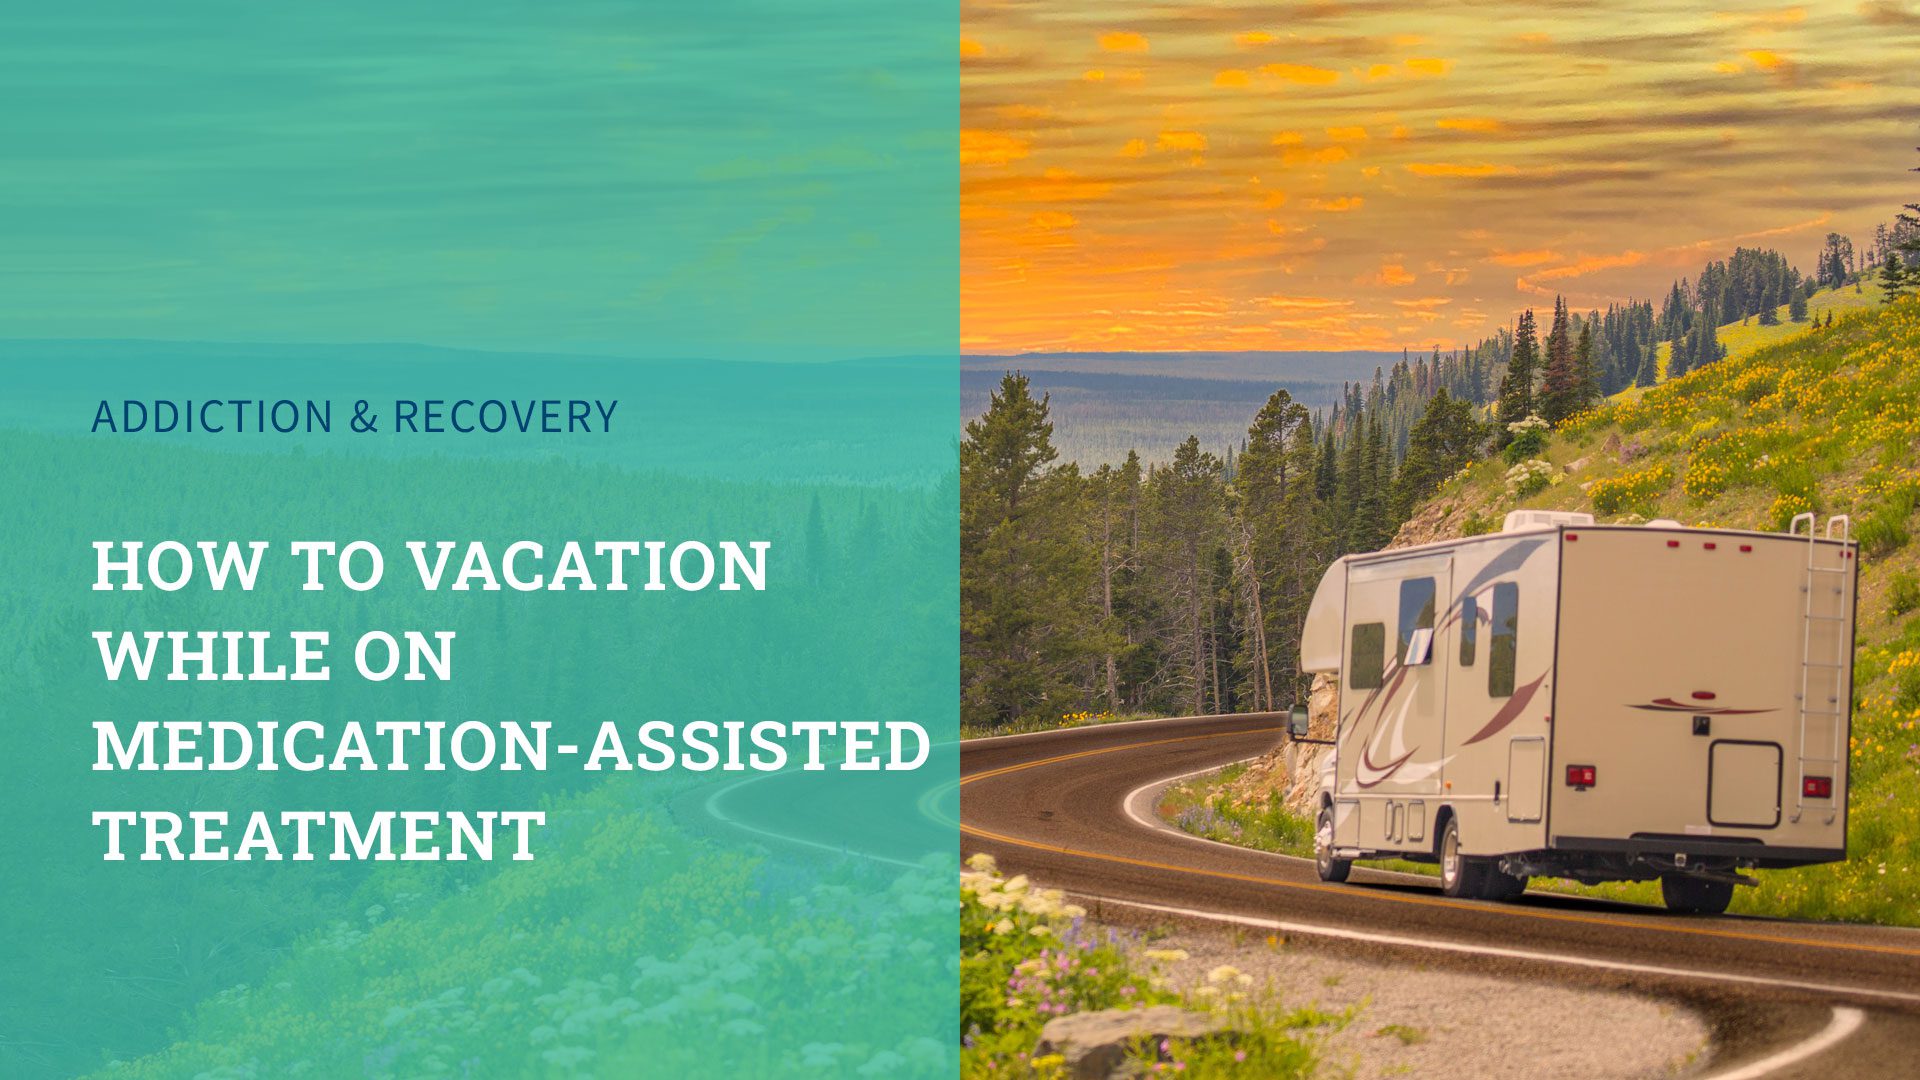 How To Vacation While on Medication-Assisted Treatment